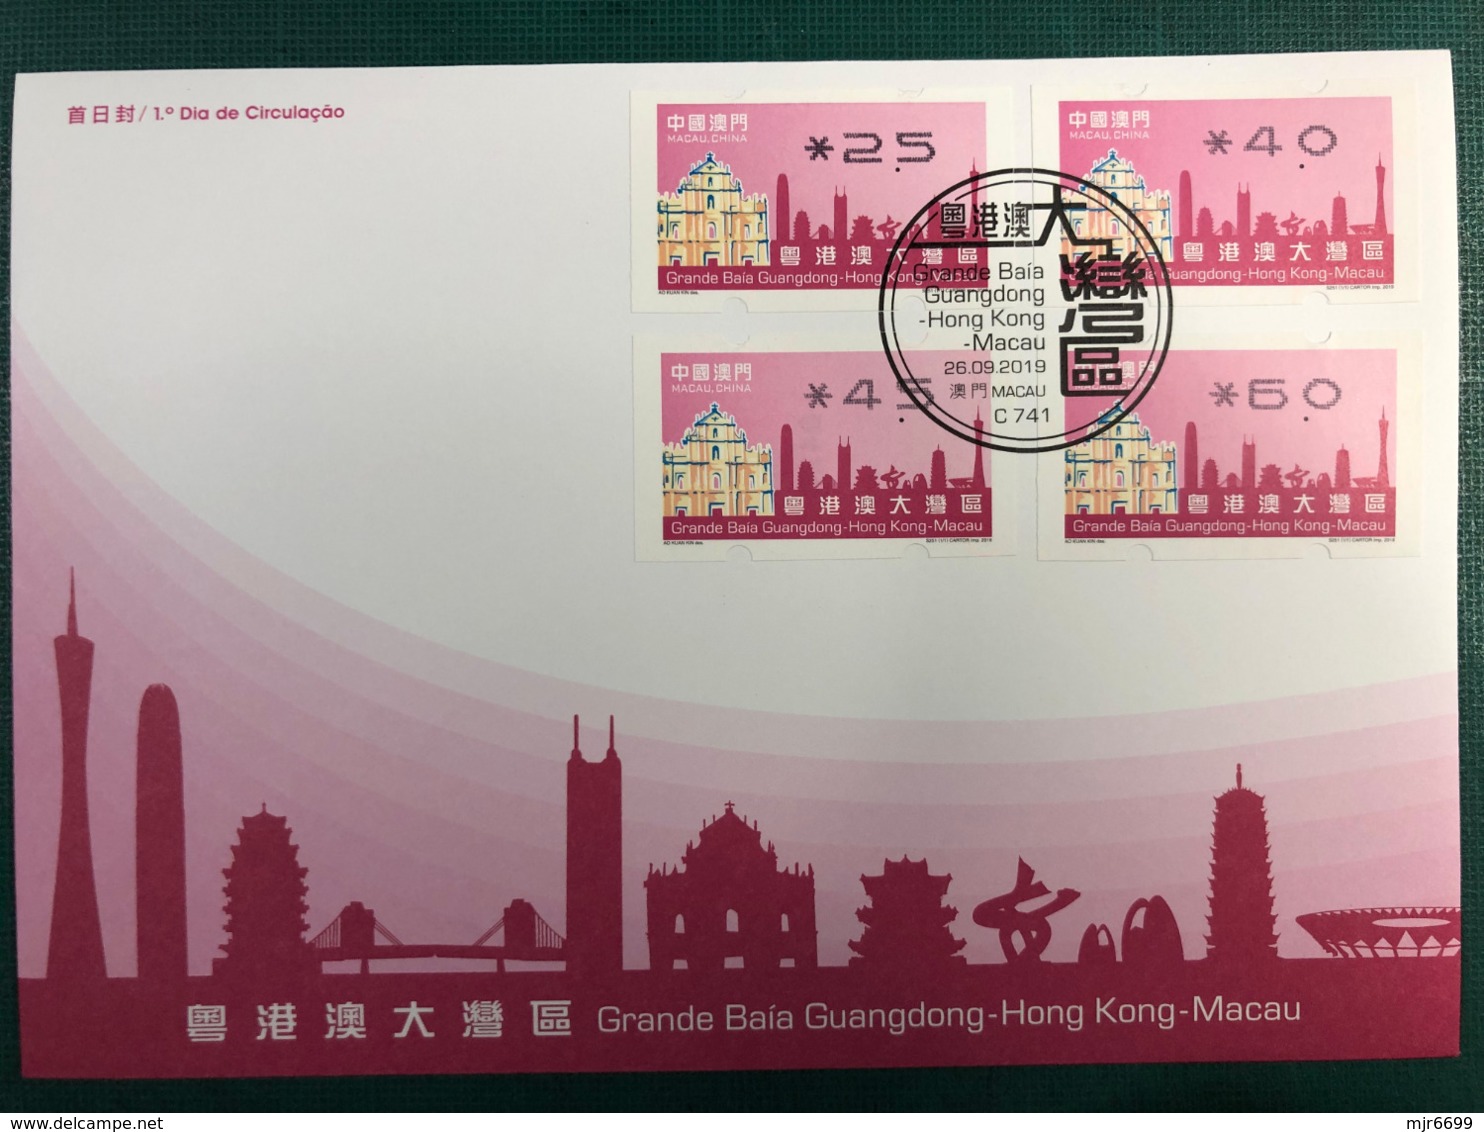 MACAU GREAT BAY 2019 ATM LABELS FDC WITH NEW VISION BOTTOM SET - Automatenmarken